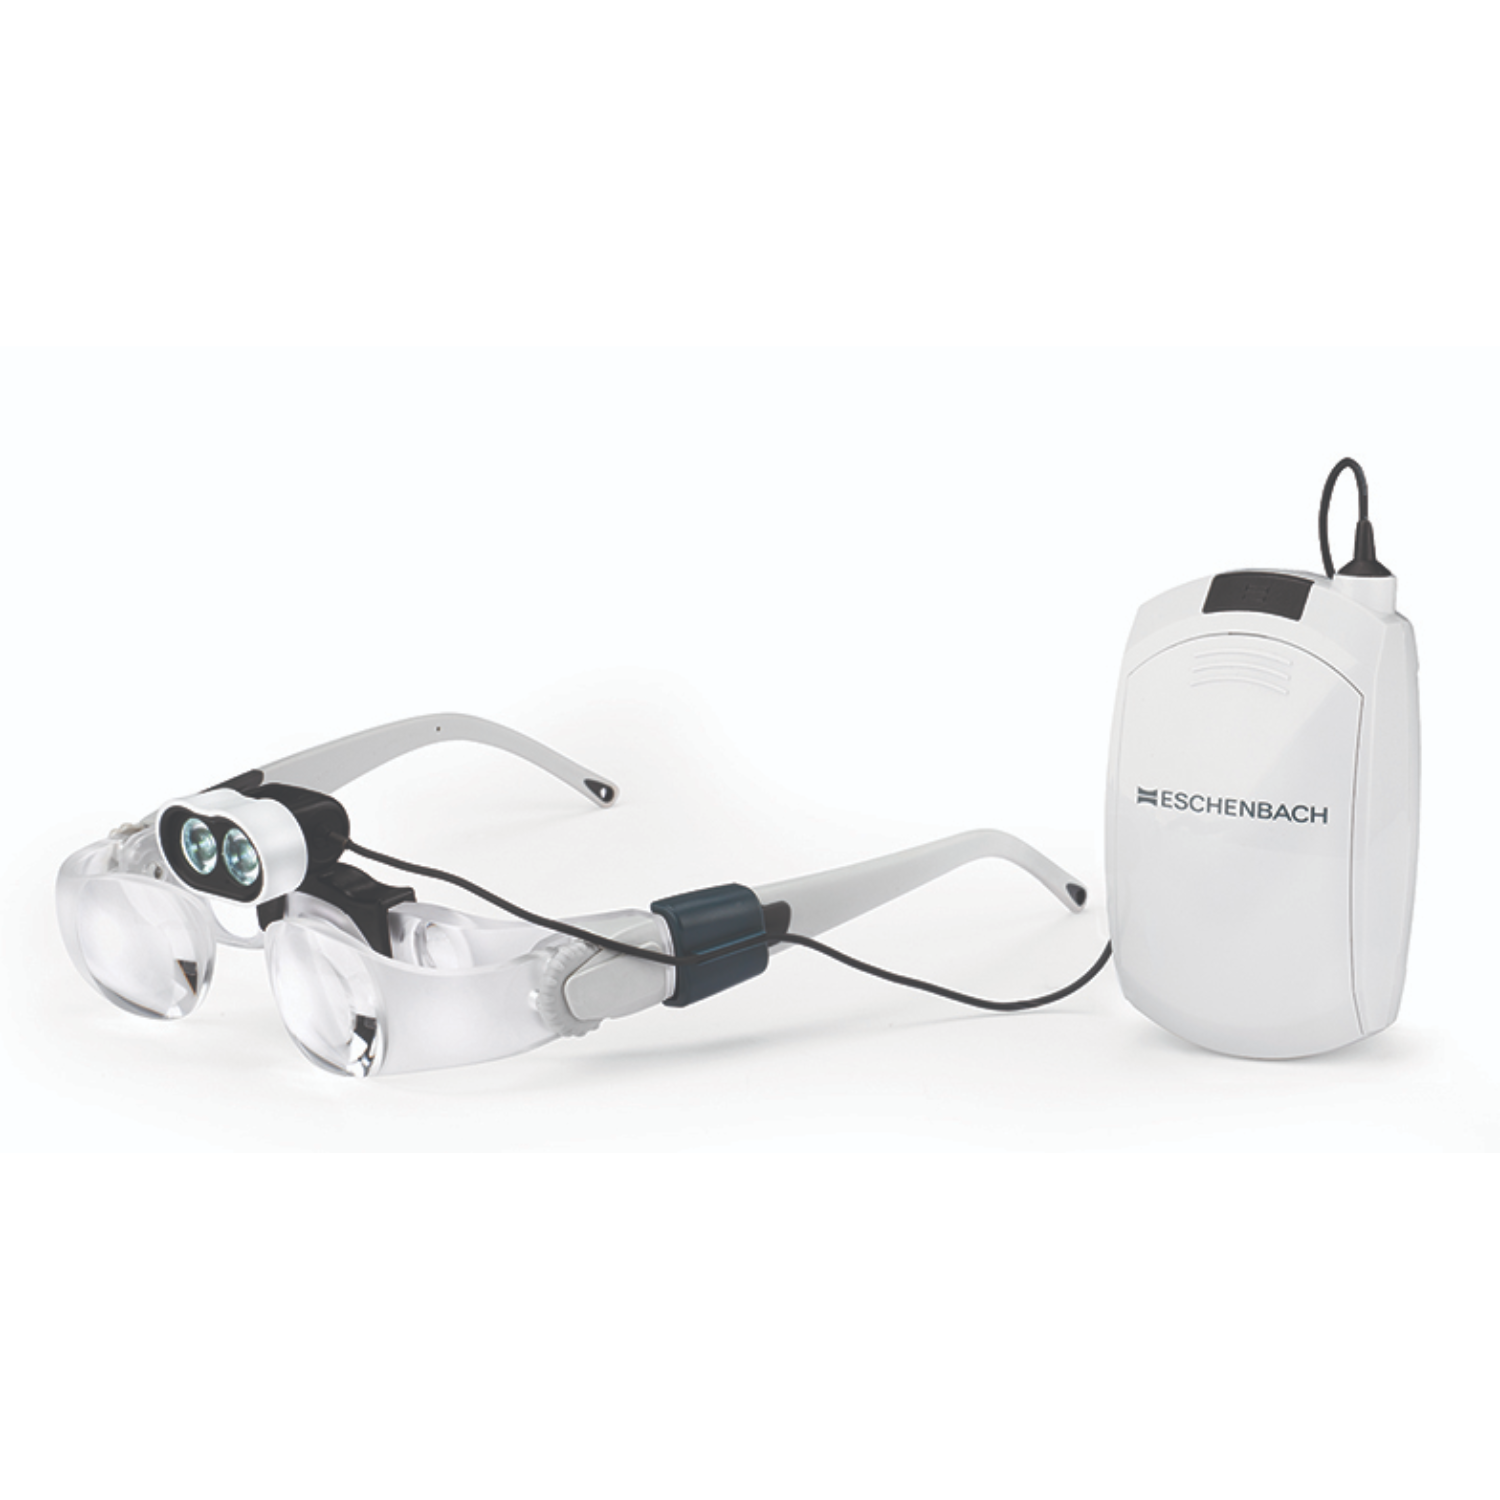 Hands-Free Magnifiers - Low Vision Aids from Eschenbach, OptiVISOR